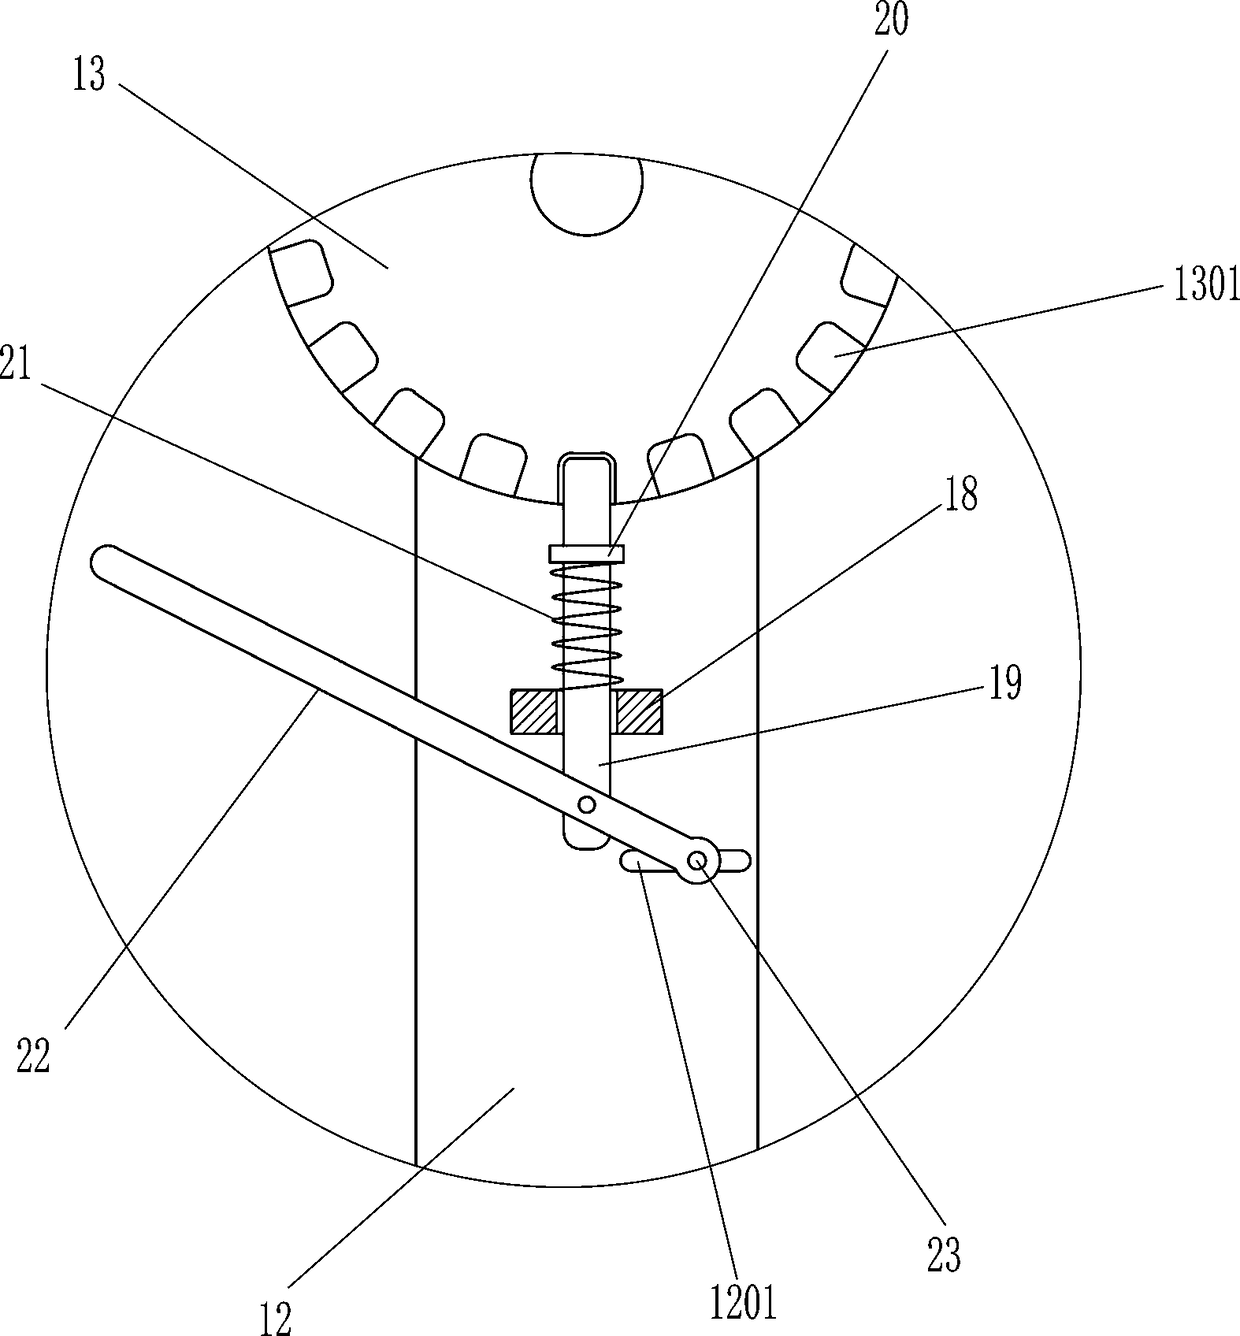 Movement assisting device